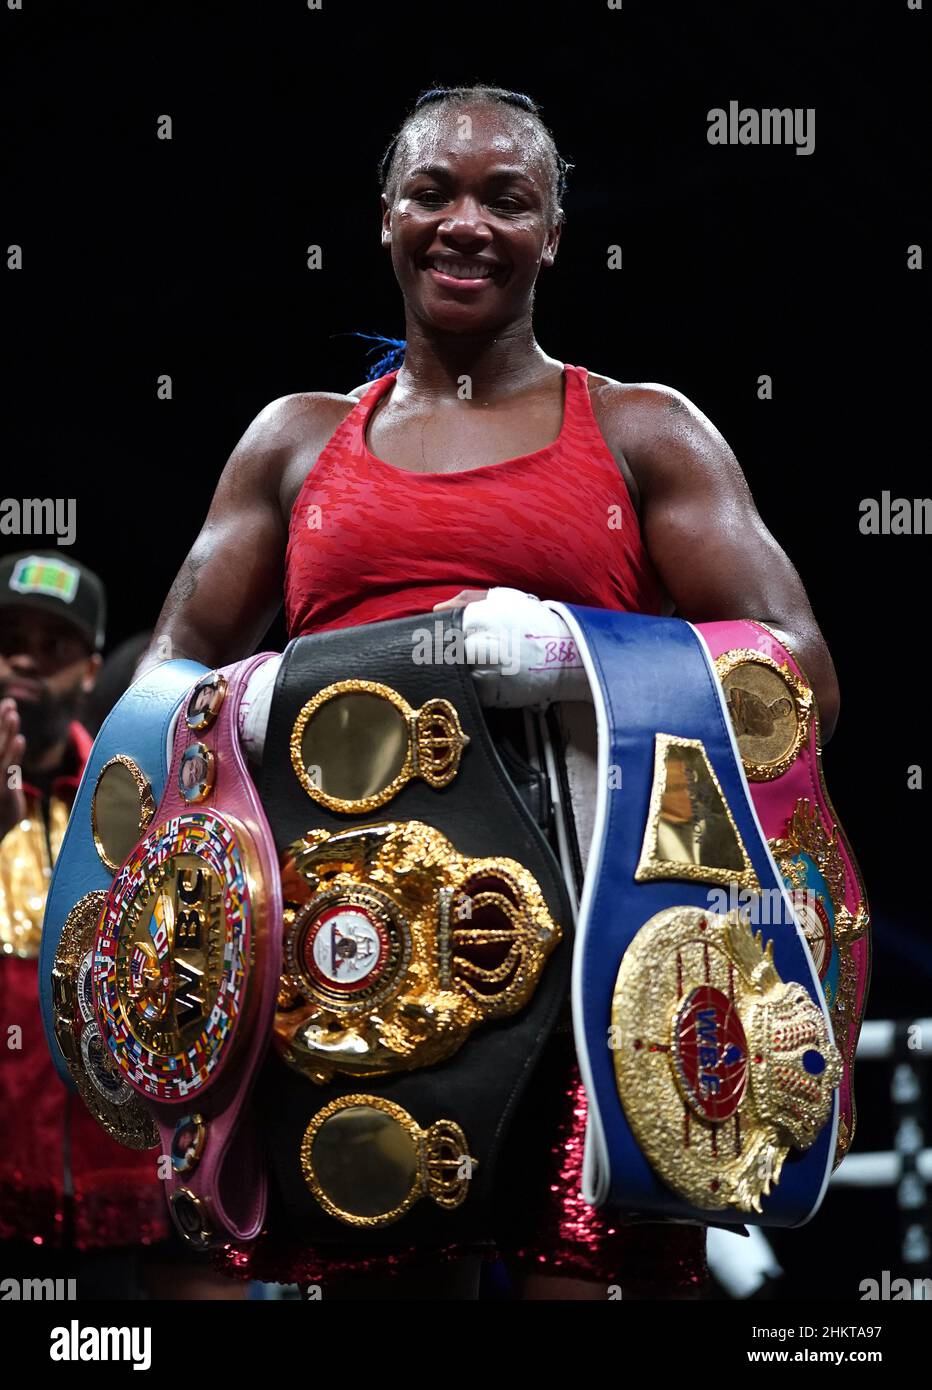 Claressa Shields celebrates victory against Ema Kozin (not pictured) in the WBC/WBA/IBF World Middleweight Titles at the Motorpoint Arena Cardiff